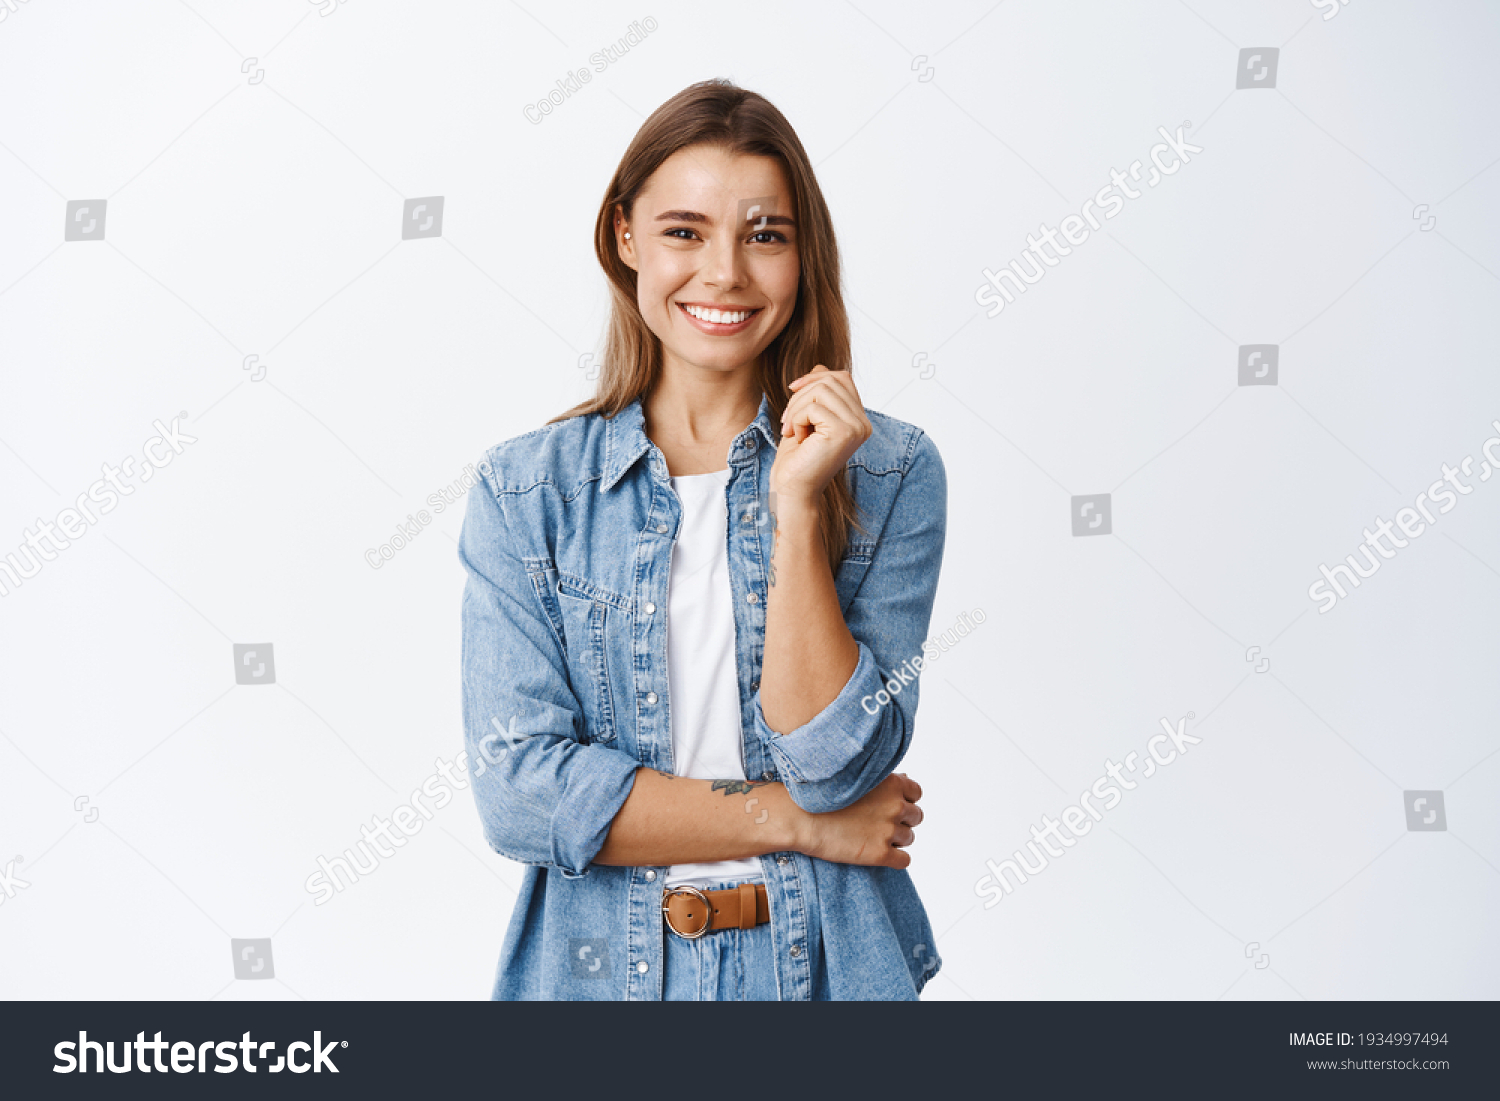 Happy successful woman standing in casual outfit, smiling pleased at camera and looking confident, standing against white background #1934997494